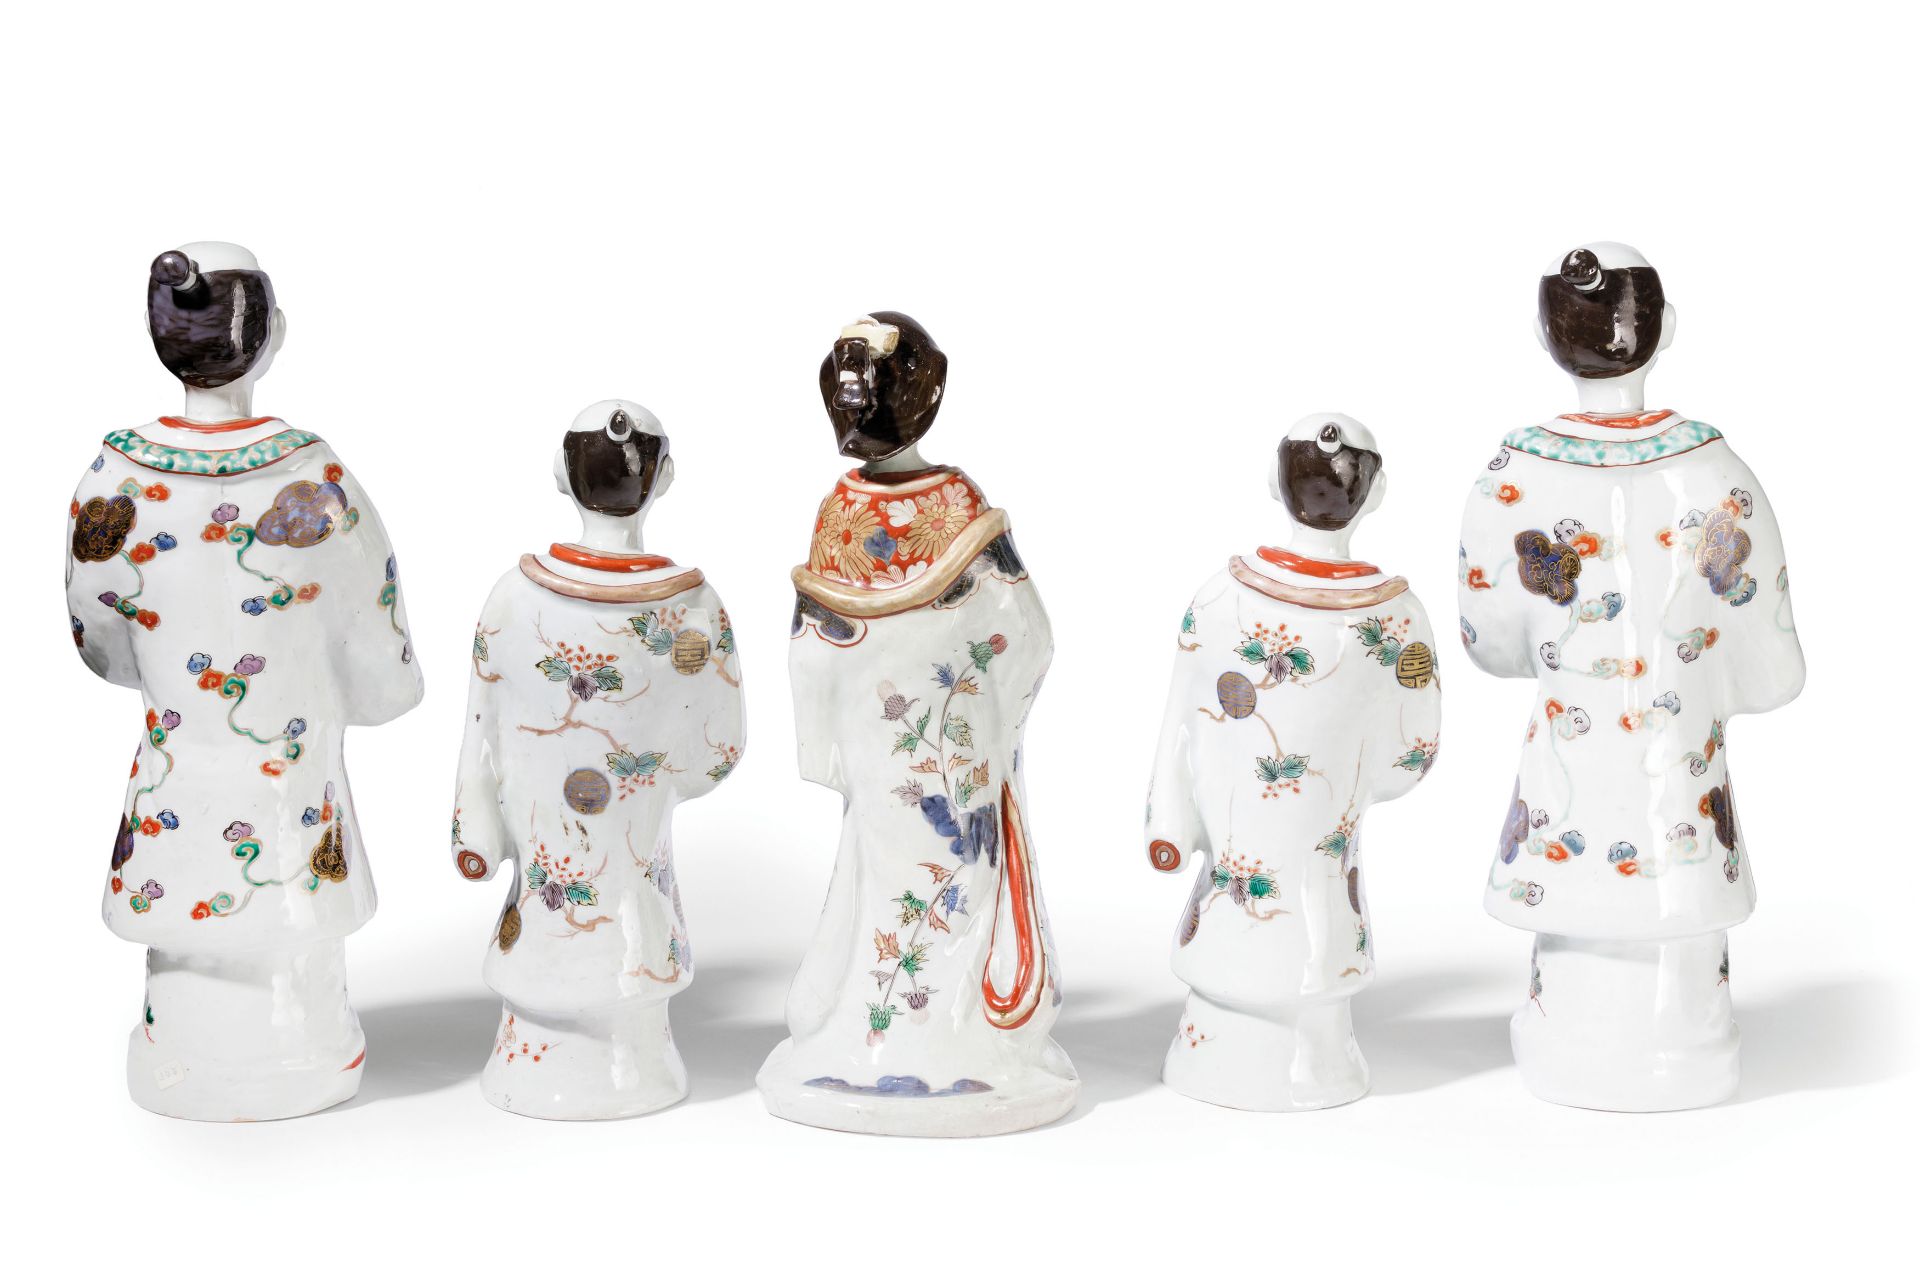 FIVE LARGE STANDING IMARI PORCELAIN FIGURES, JAPAN, EARLY 18TH CENTURY (5) - Image 2 of 2